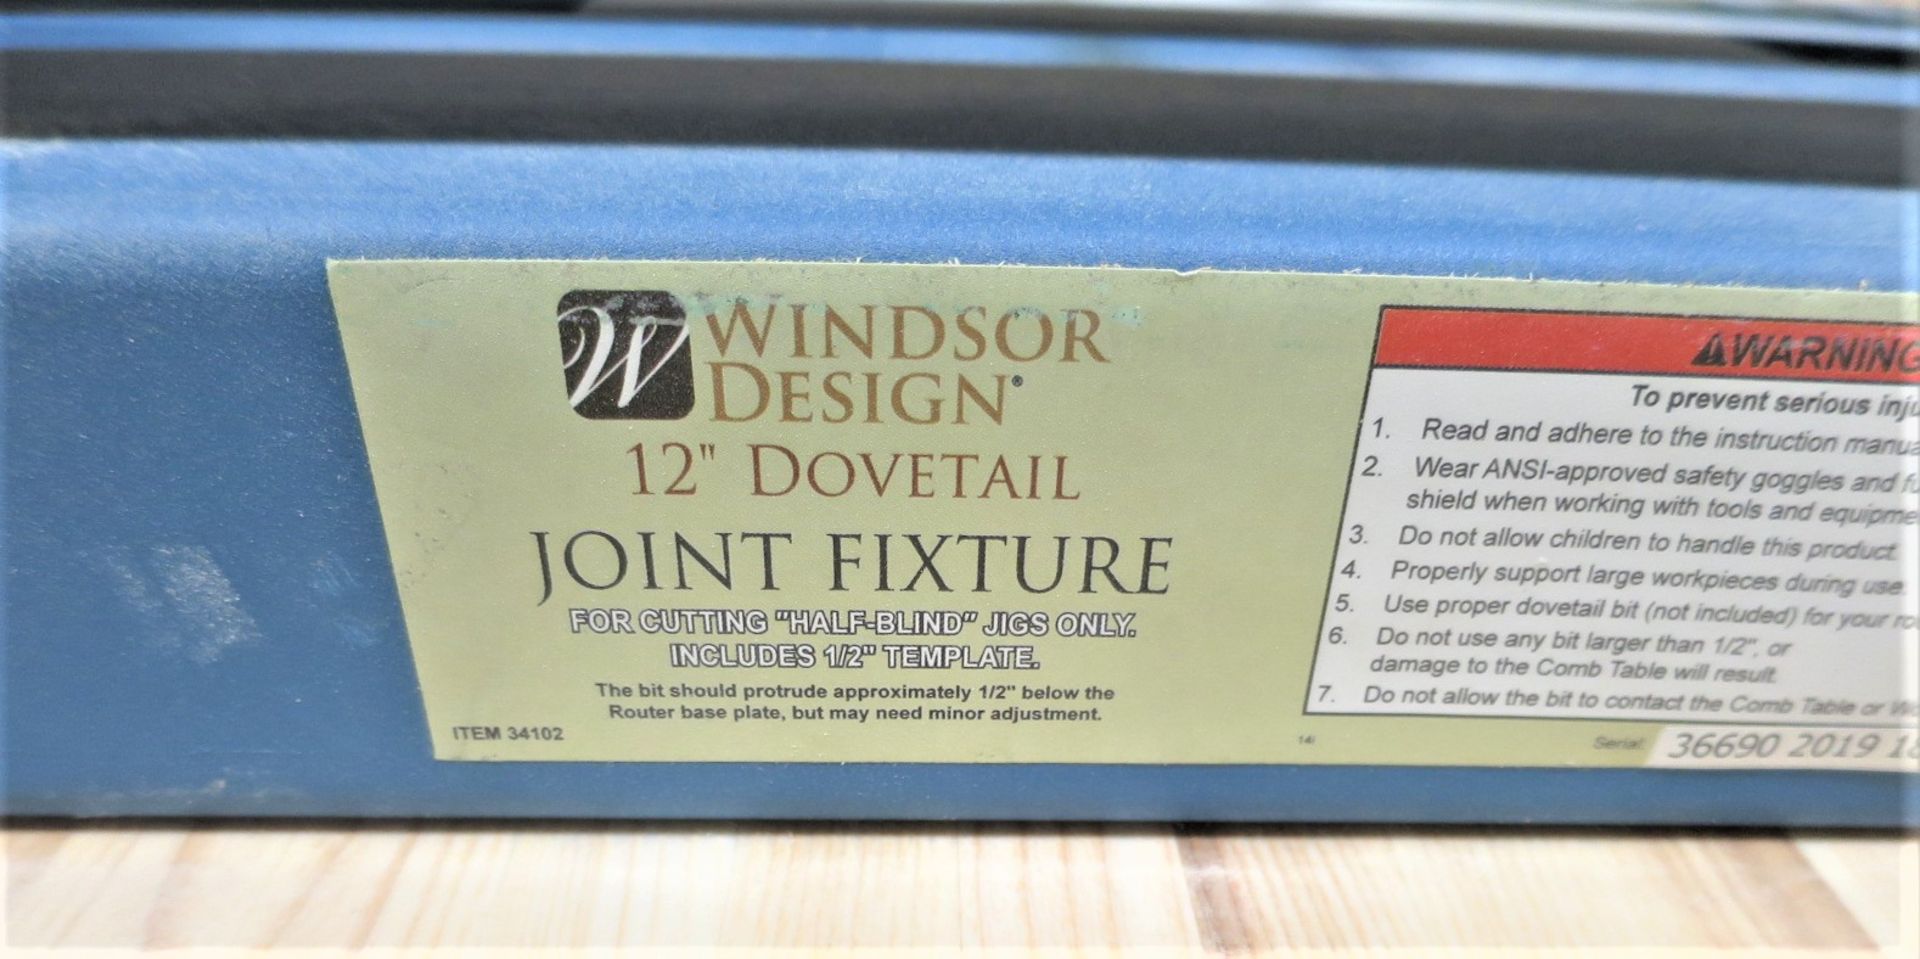 Windsor Design 12" Dovetail Joint Fixture - Image 2 of 2